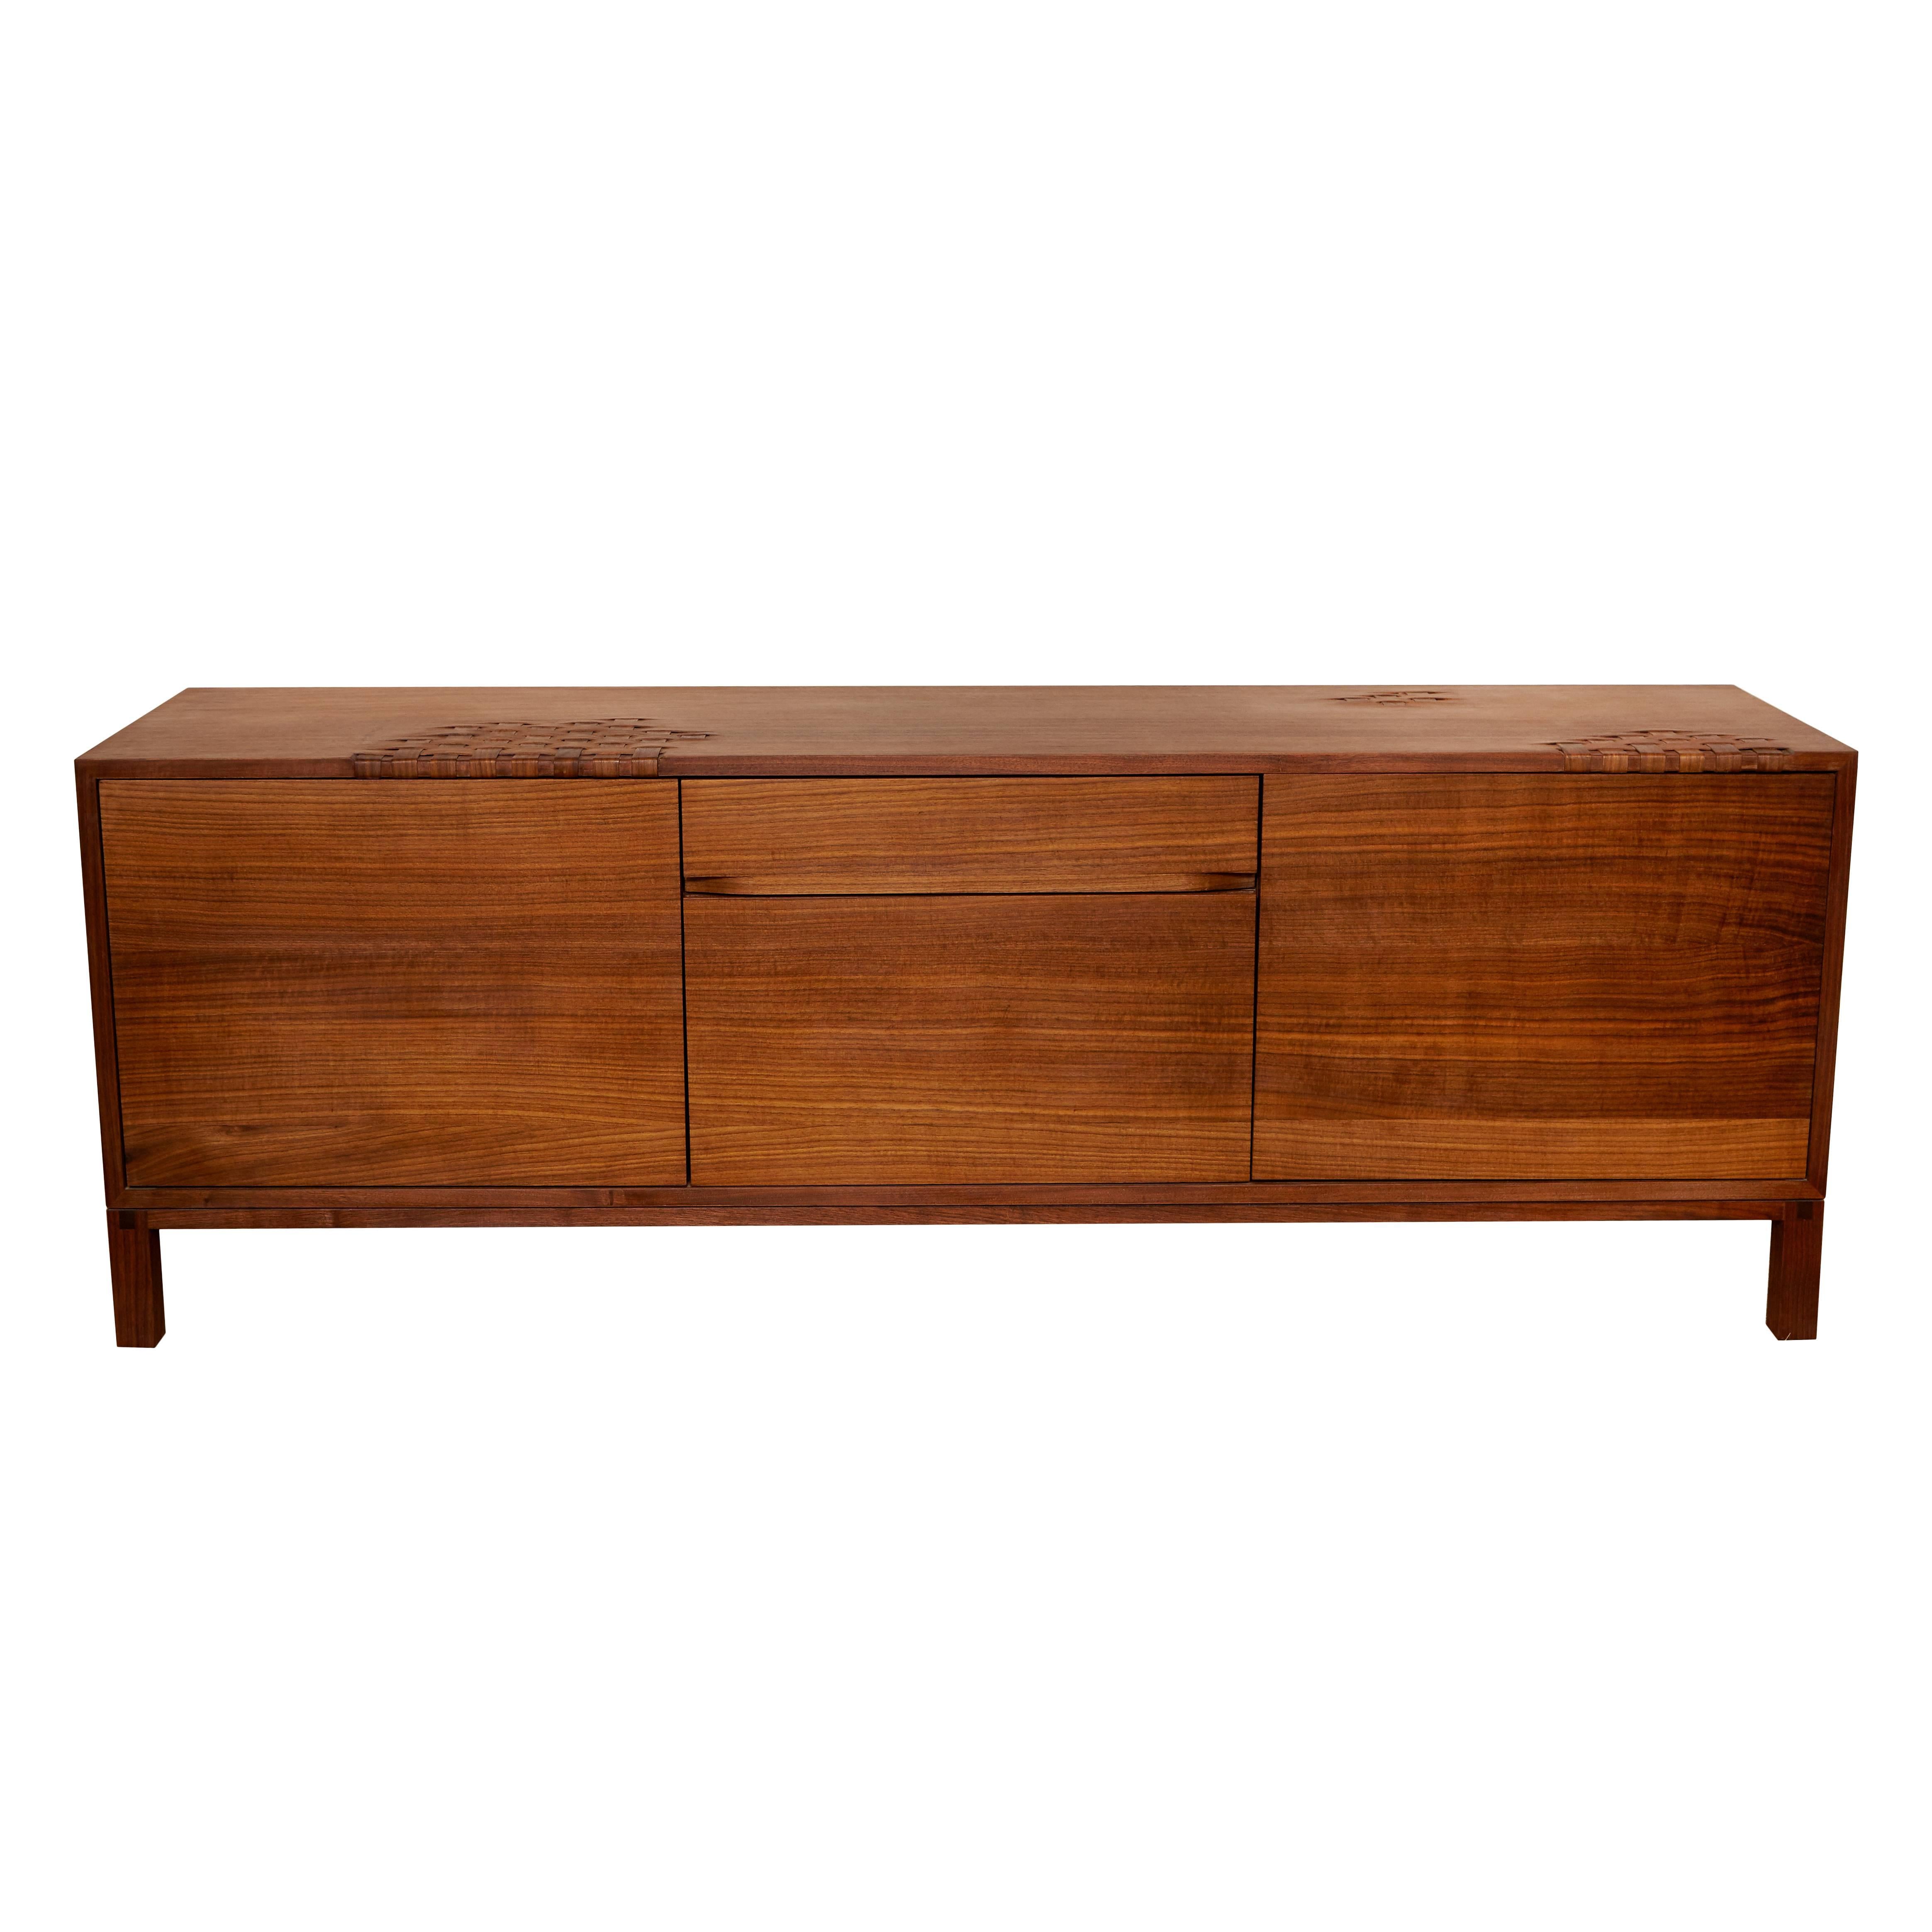 Weave credenza by Don Howell, circa 2016. A simple case piece with a surface that undulates between solid and woven wood with a hand rubbed oil finish.